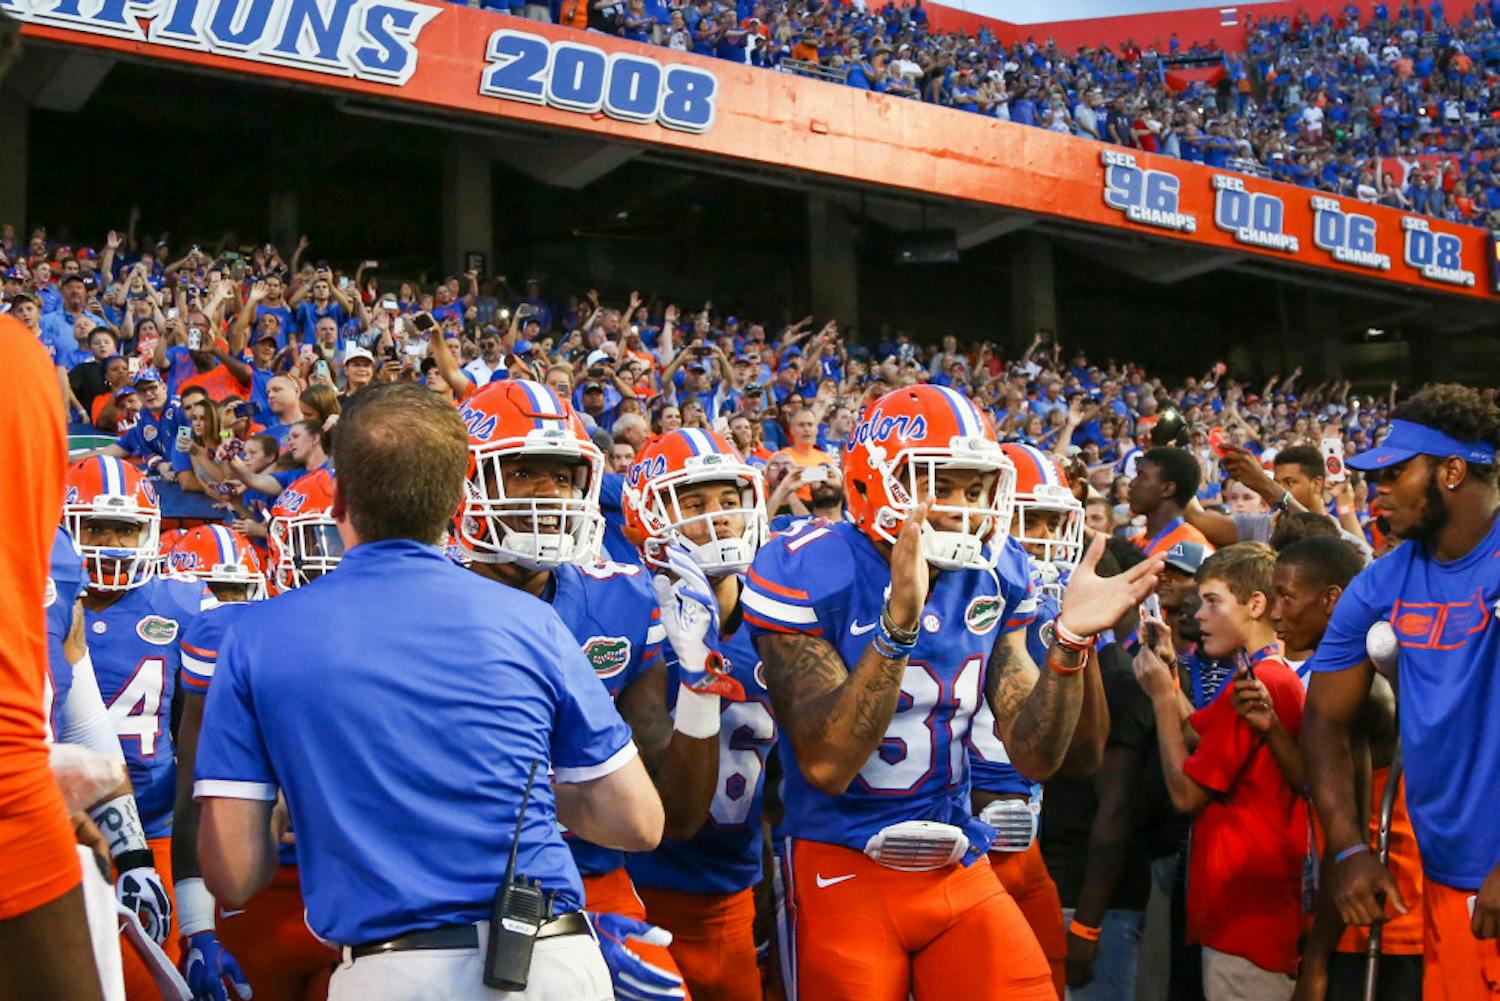 Jalen Tabor (31) claps before walking out of the tunnel at Ben Hill Griffin Stadium during Florida's 33-0 win over North Texas on Sept. 17, 2016.